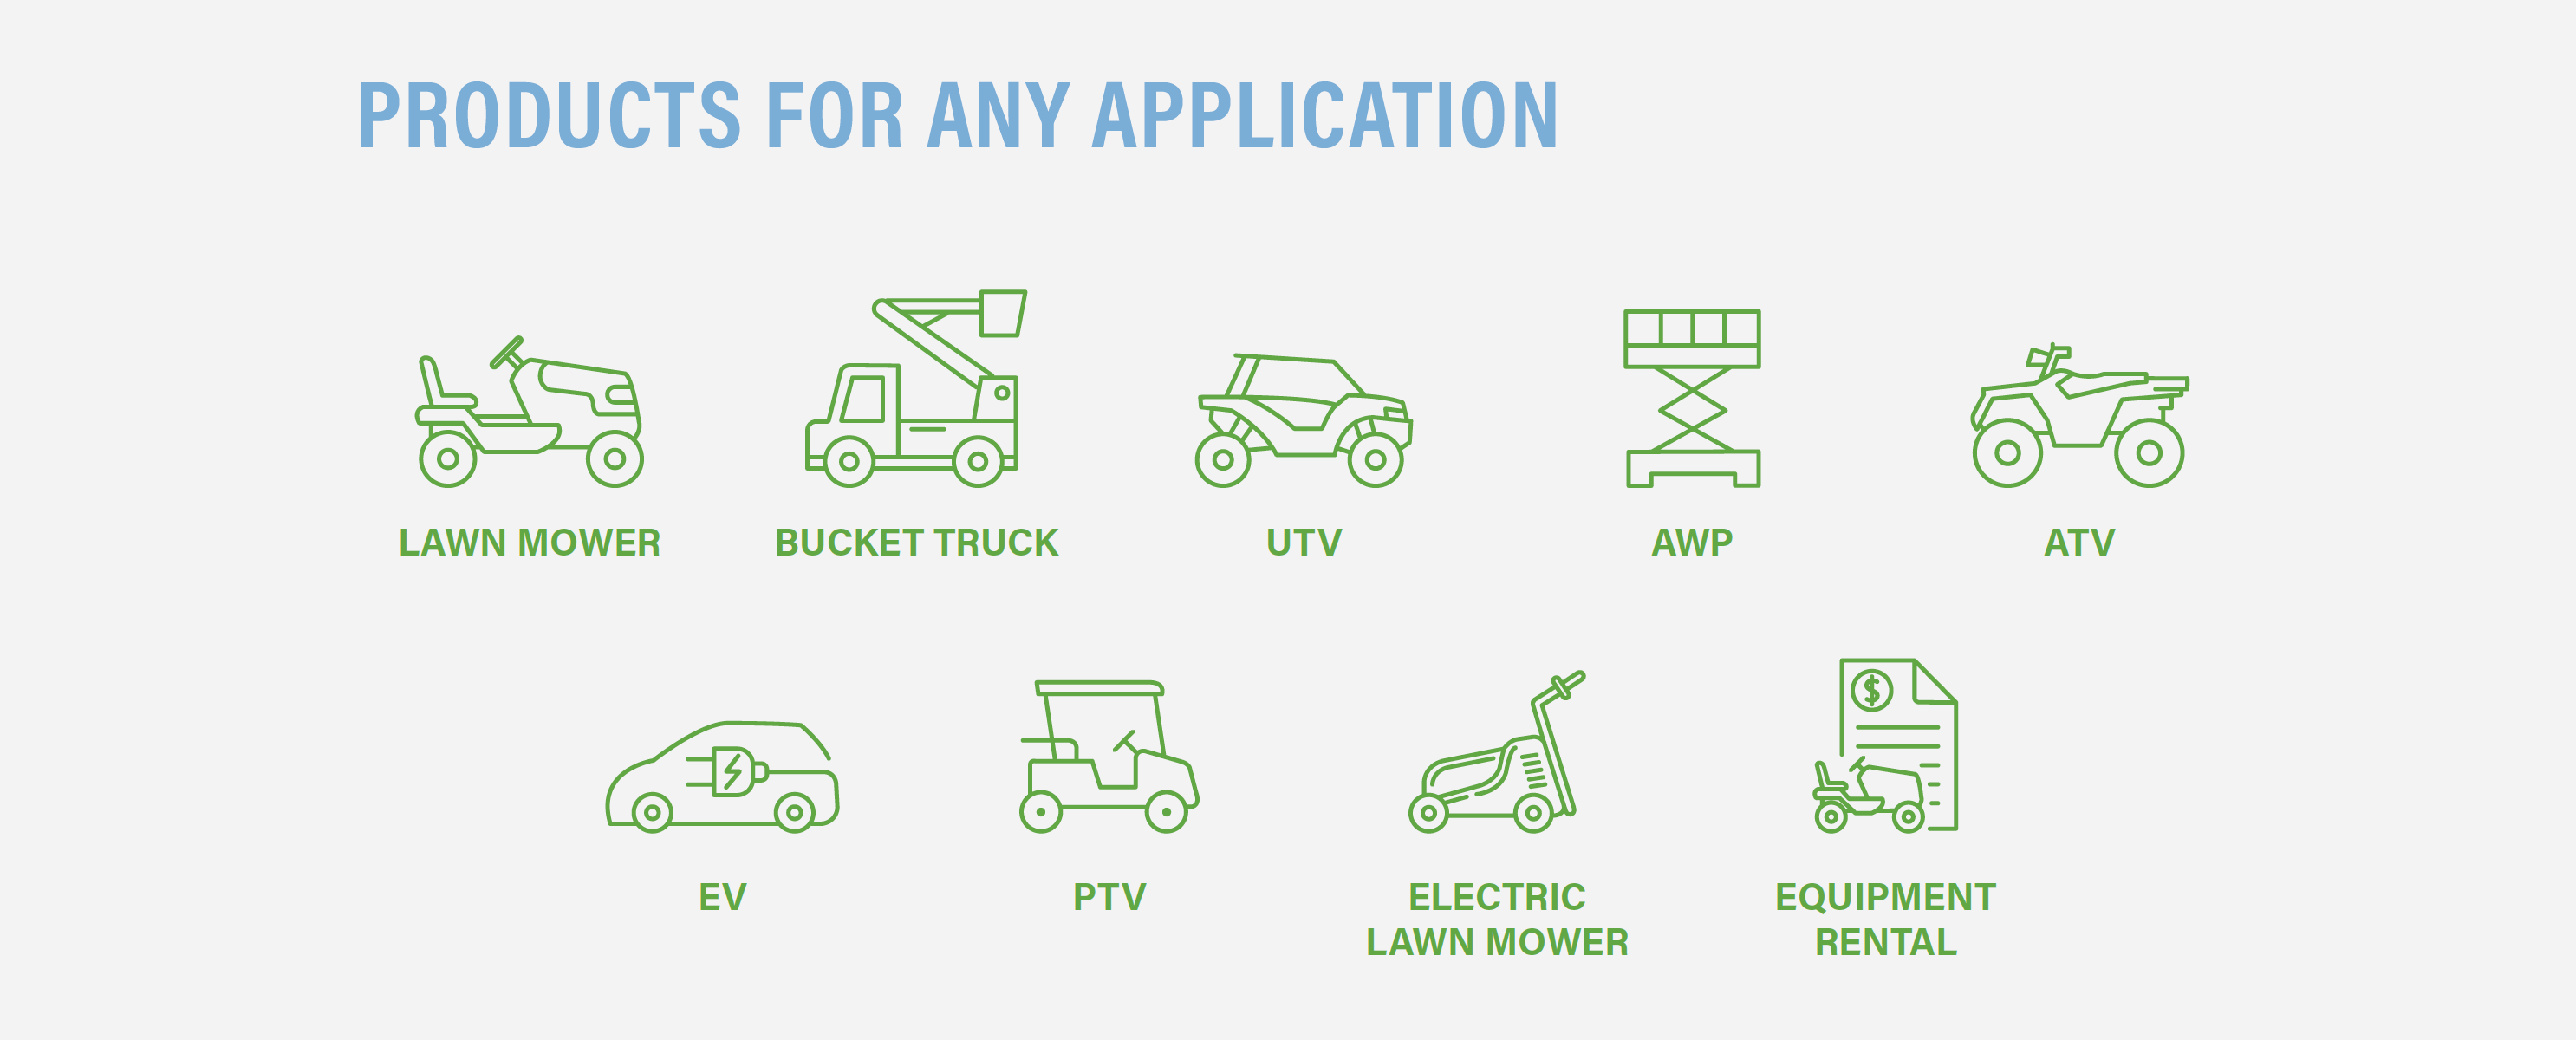 Products For Any Equipment Application